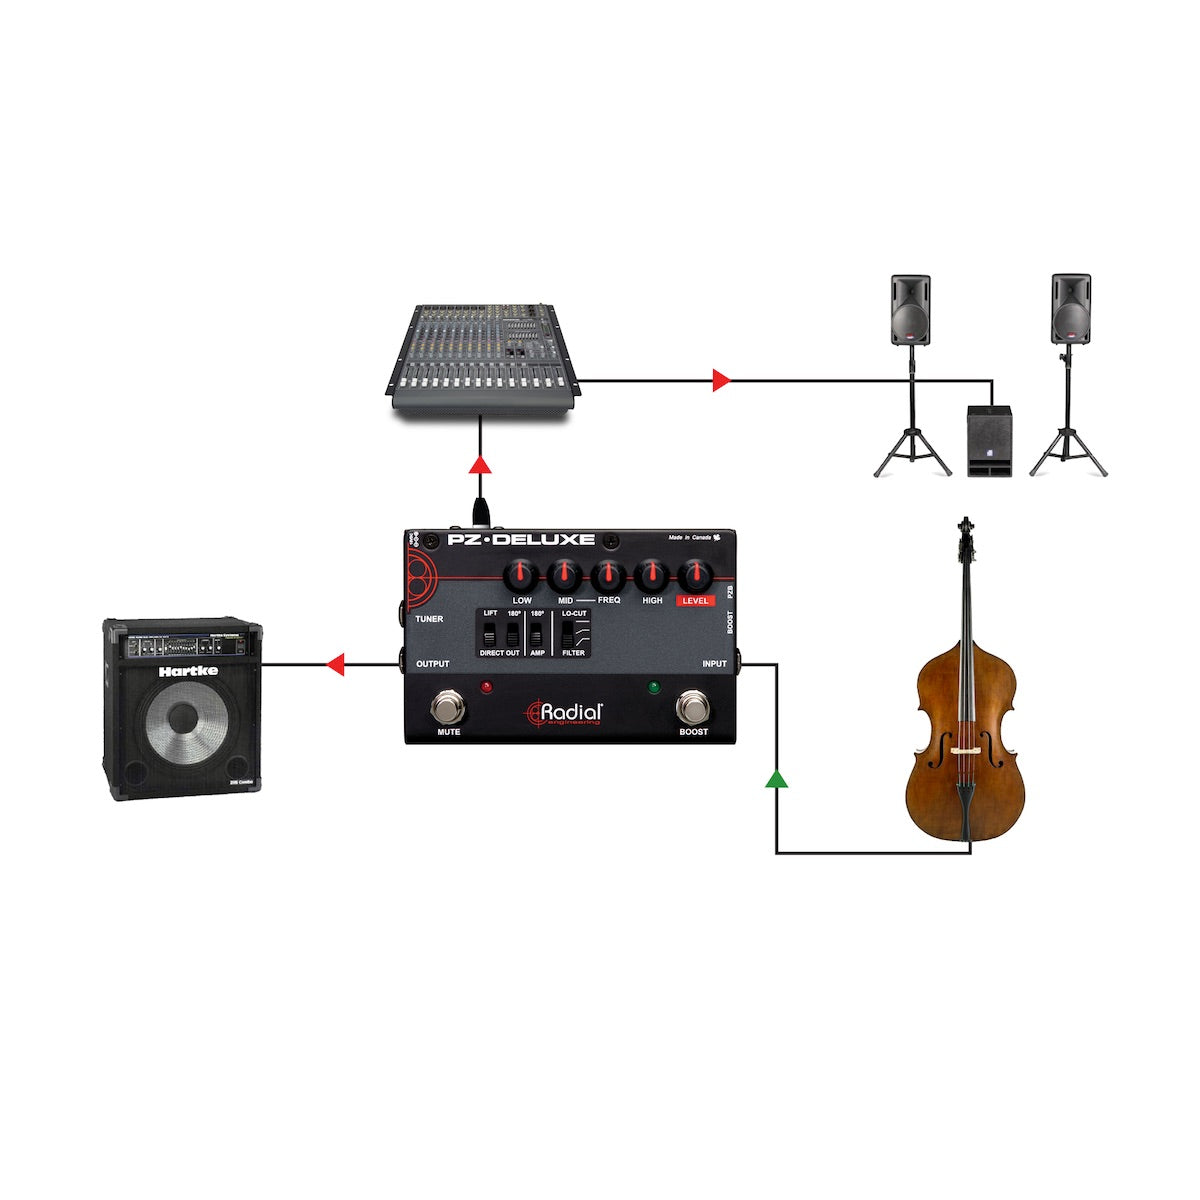 Radial PZ-Deluxe - Acoustic Instrument Preamp, application diagram